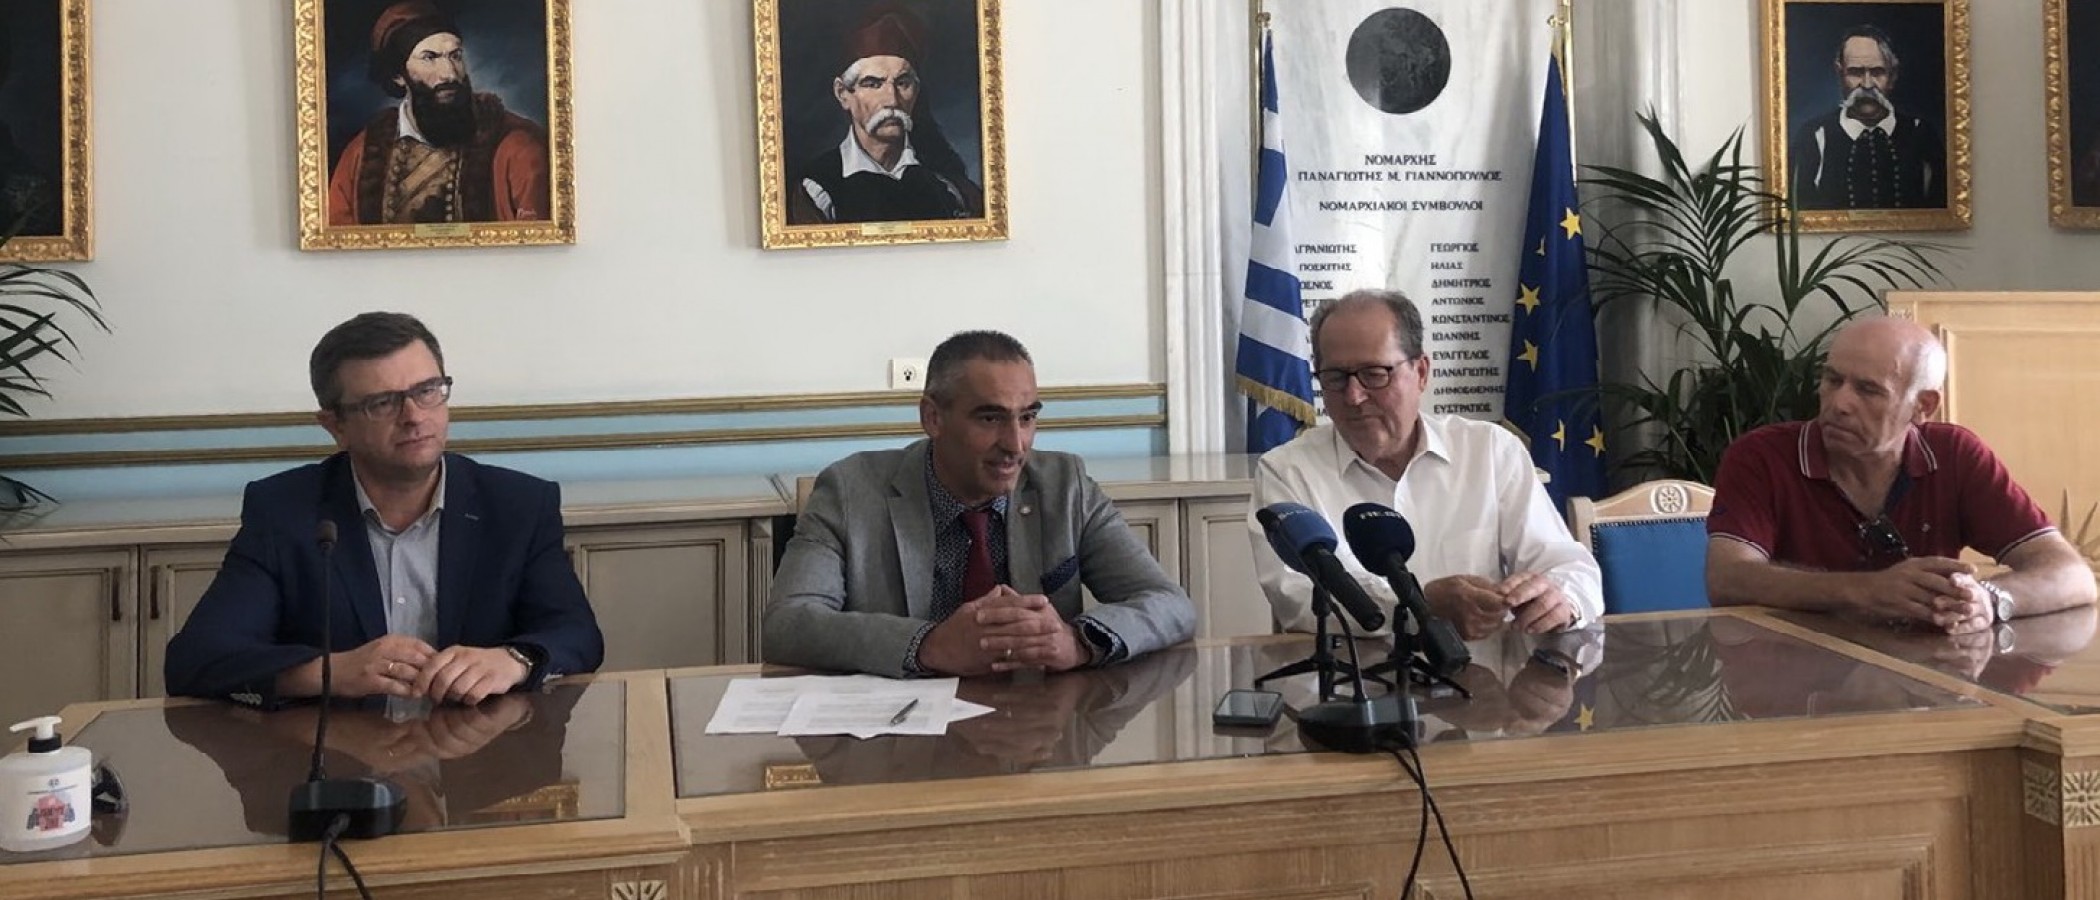 A Programme Contract signed for fighting against insects to the chestnut tree between the Agricultural University of Athens and the Region of Peloponnese